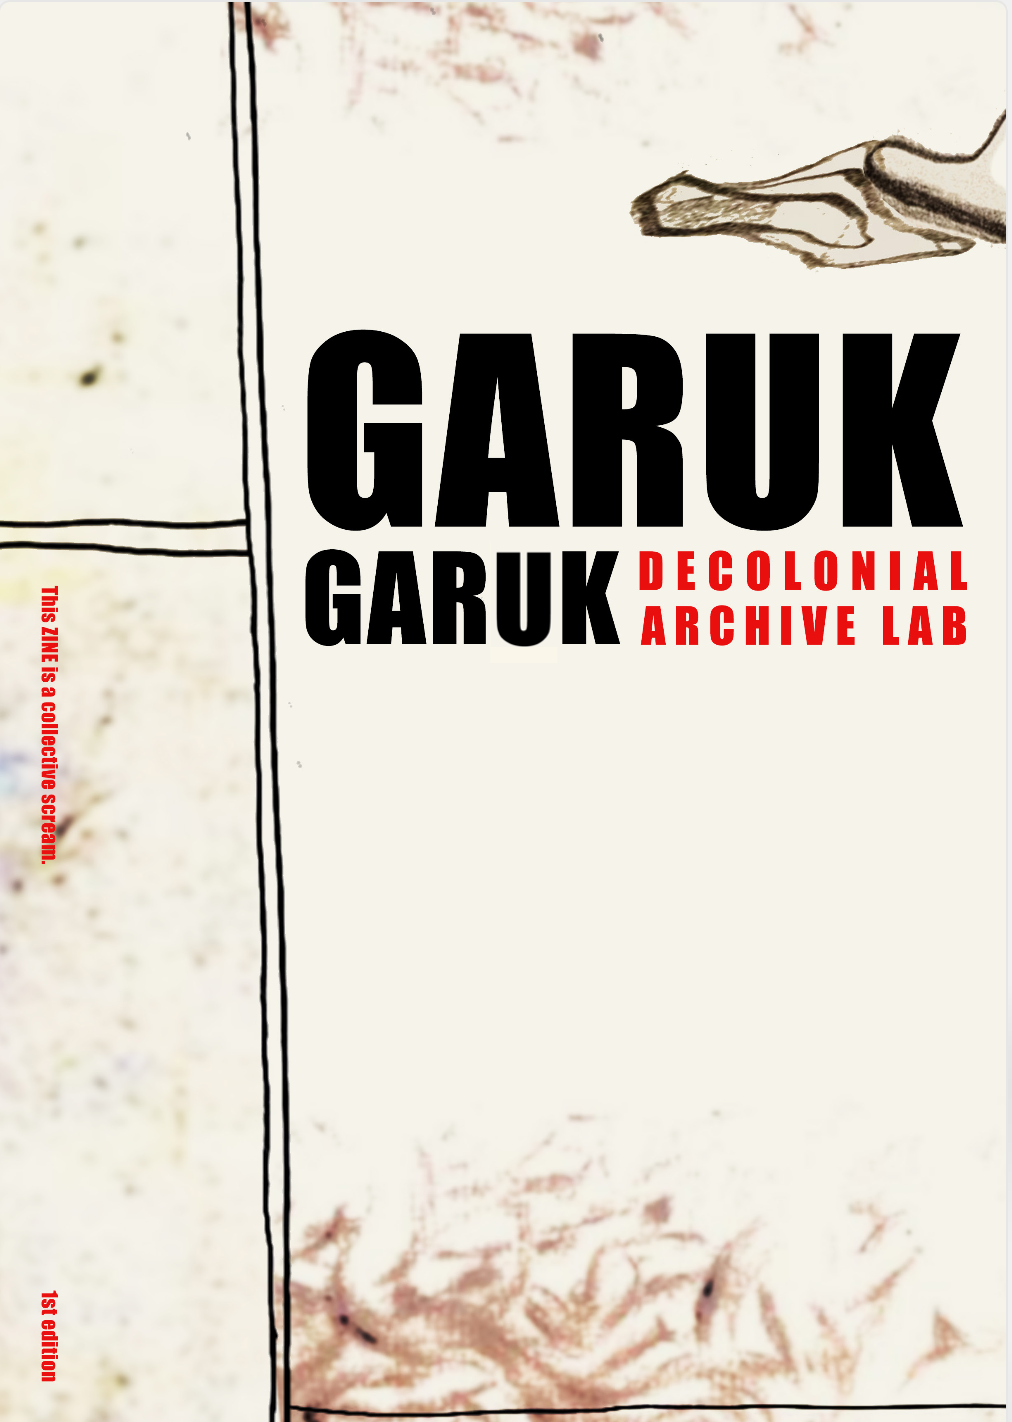 Cover of the first Issue of Gary Garuk